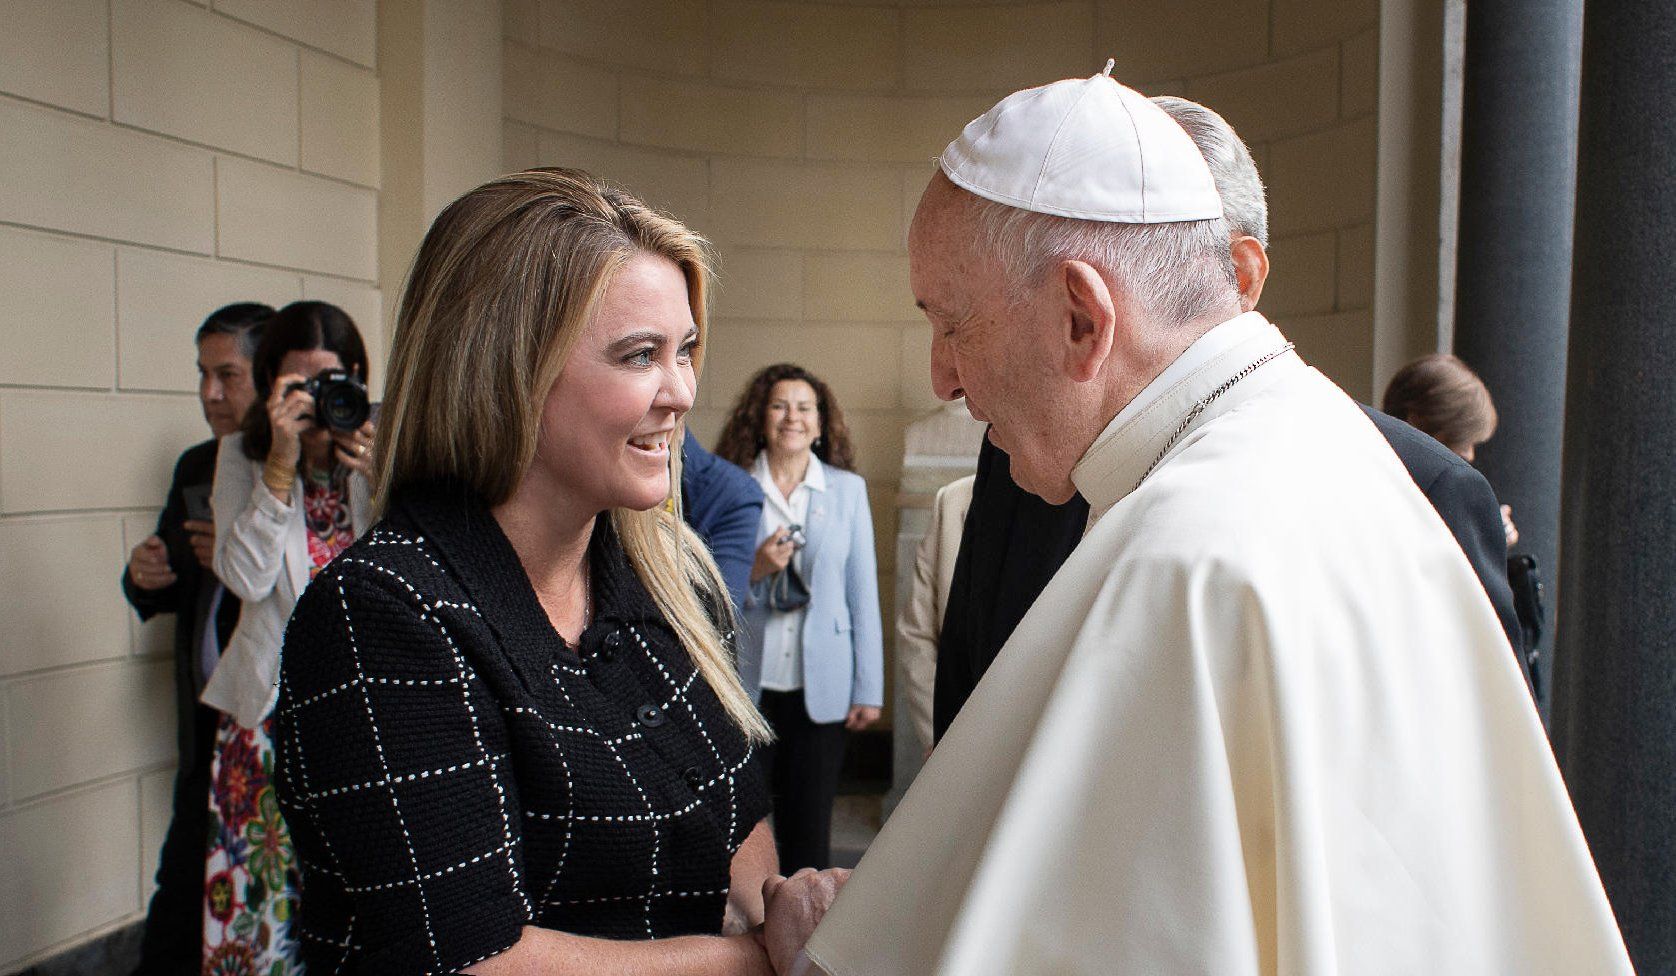 Jennifer Gross founder of Blue Chip Foundation talking to Pope Francis 